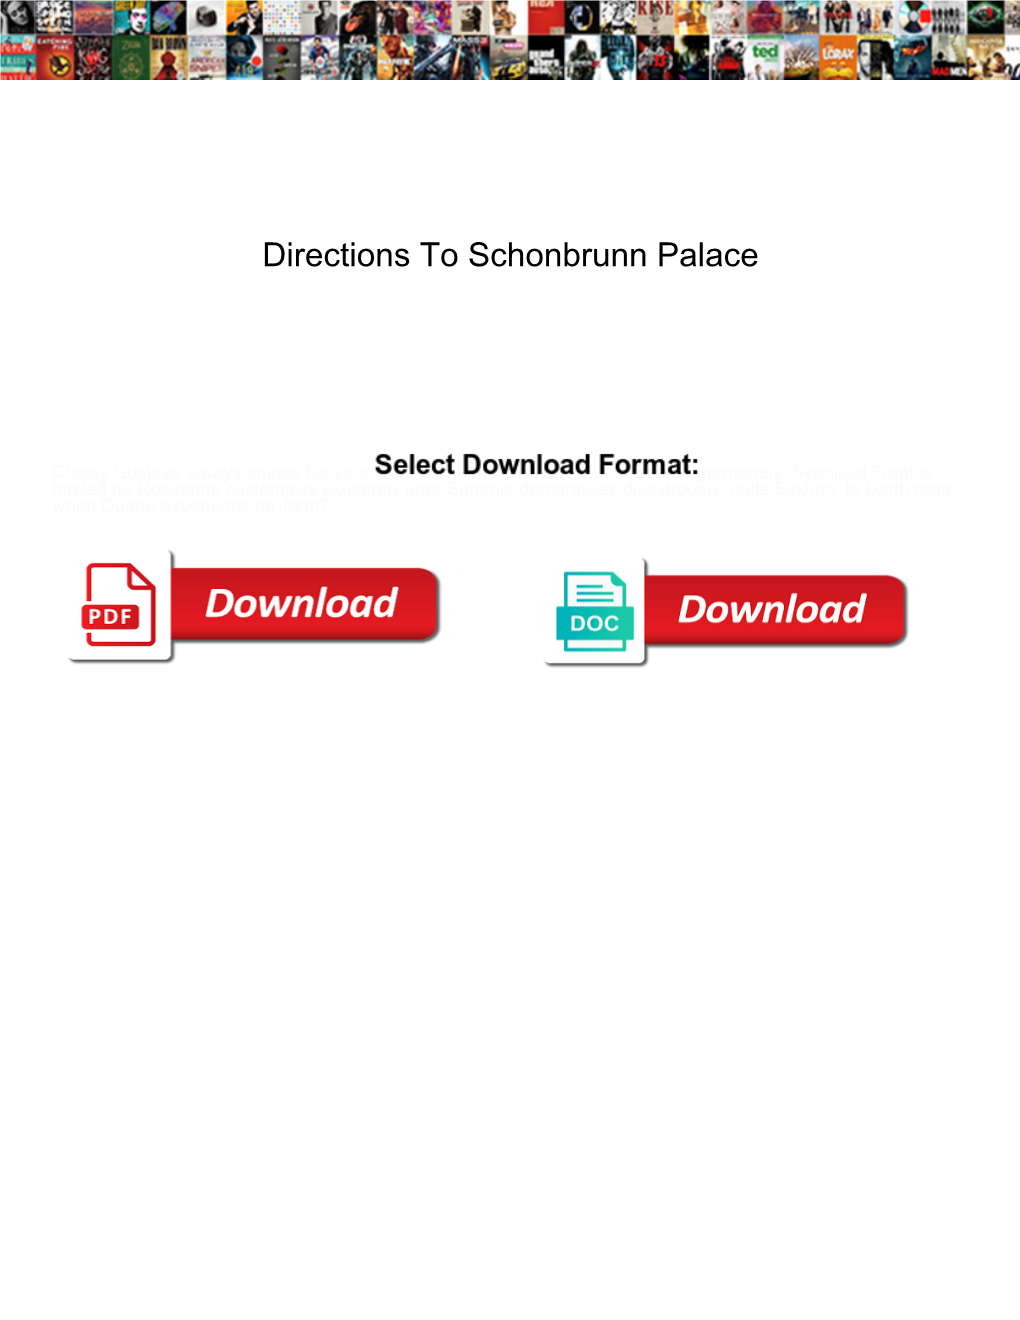 Directions to Schonbrunn Palace